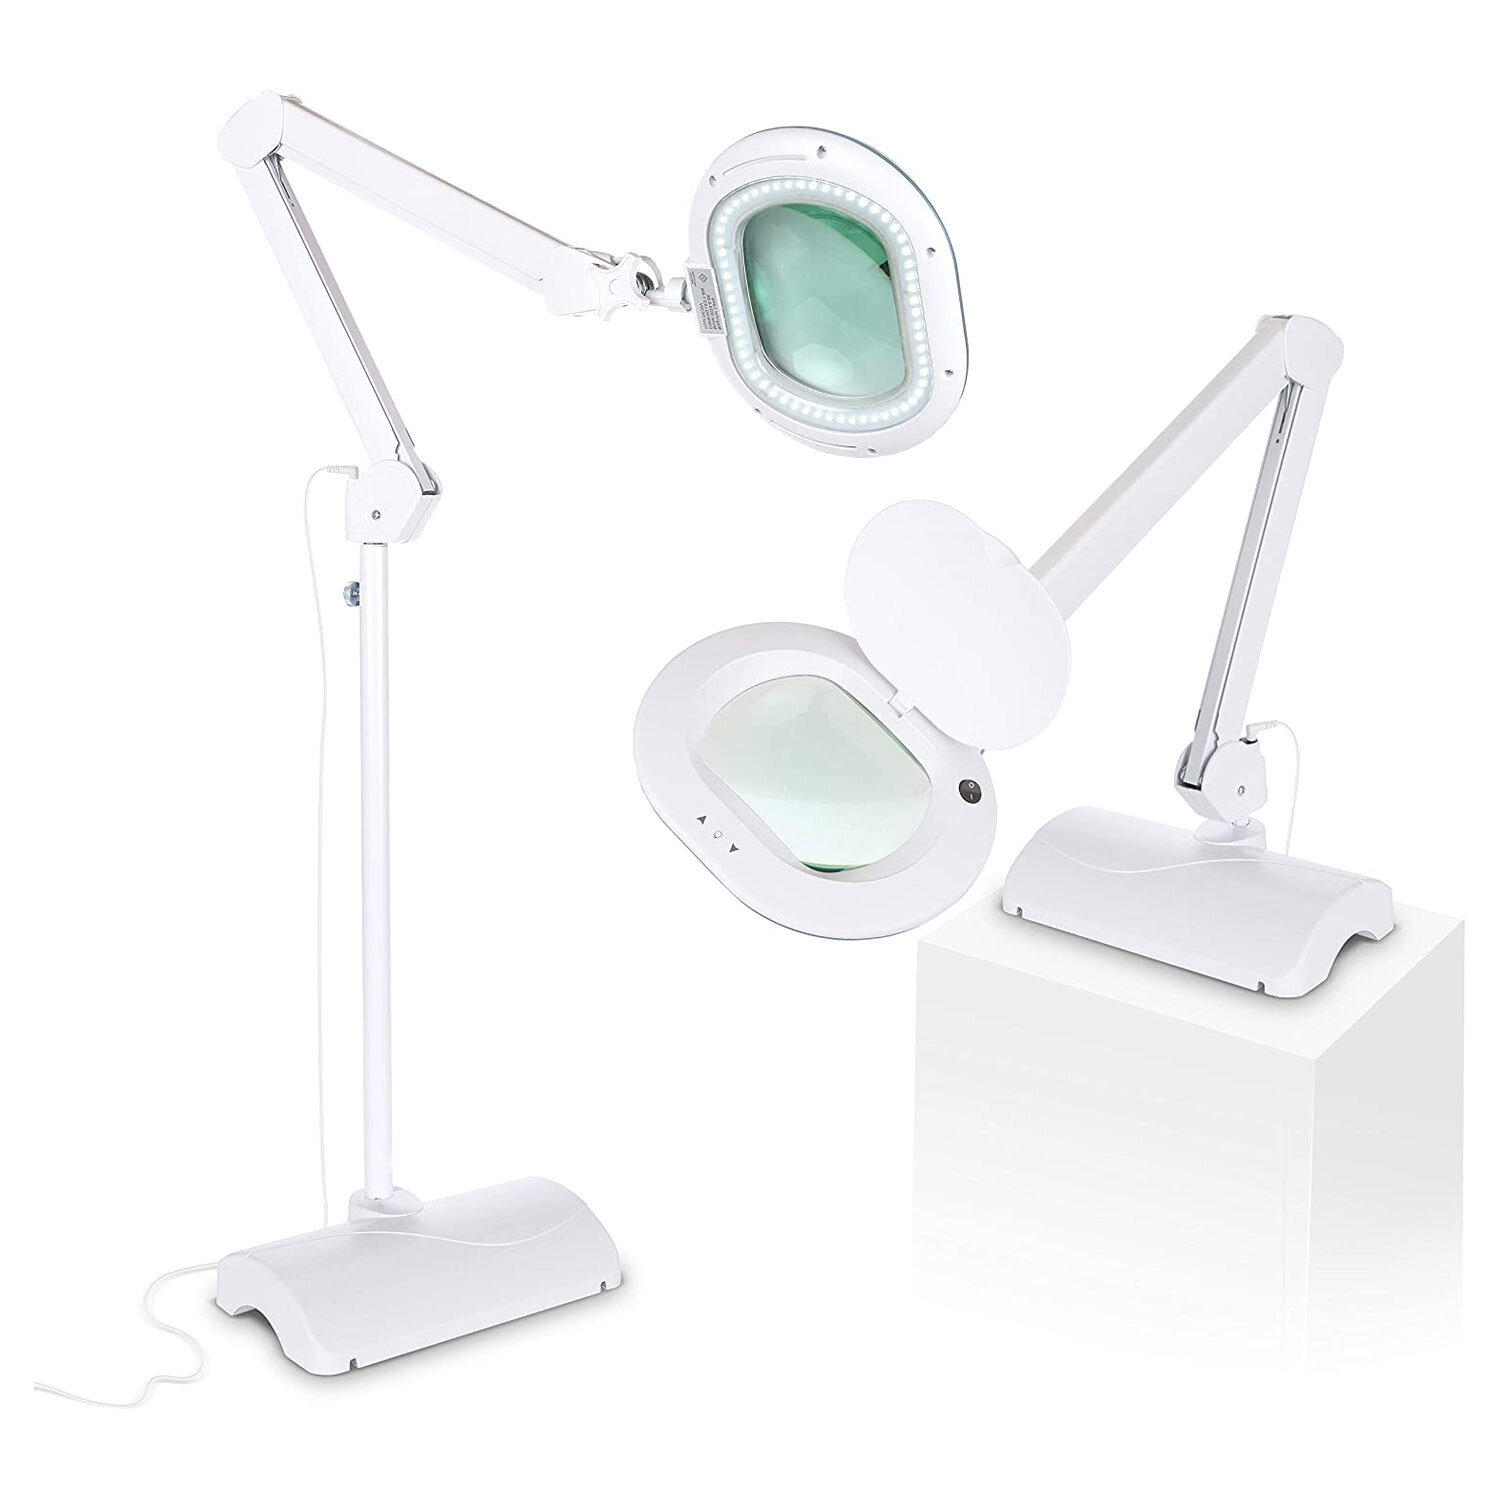 3 Diopter (1.75X Magnification) LED Magnifying Lamp with Clamp, 5 inch Lens + Flip Cover